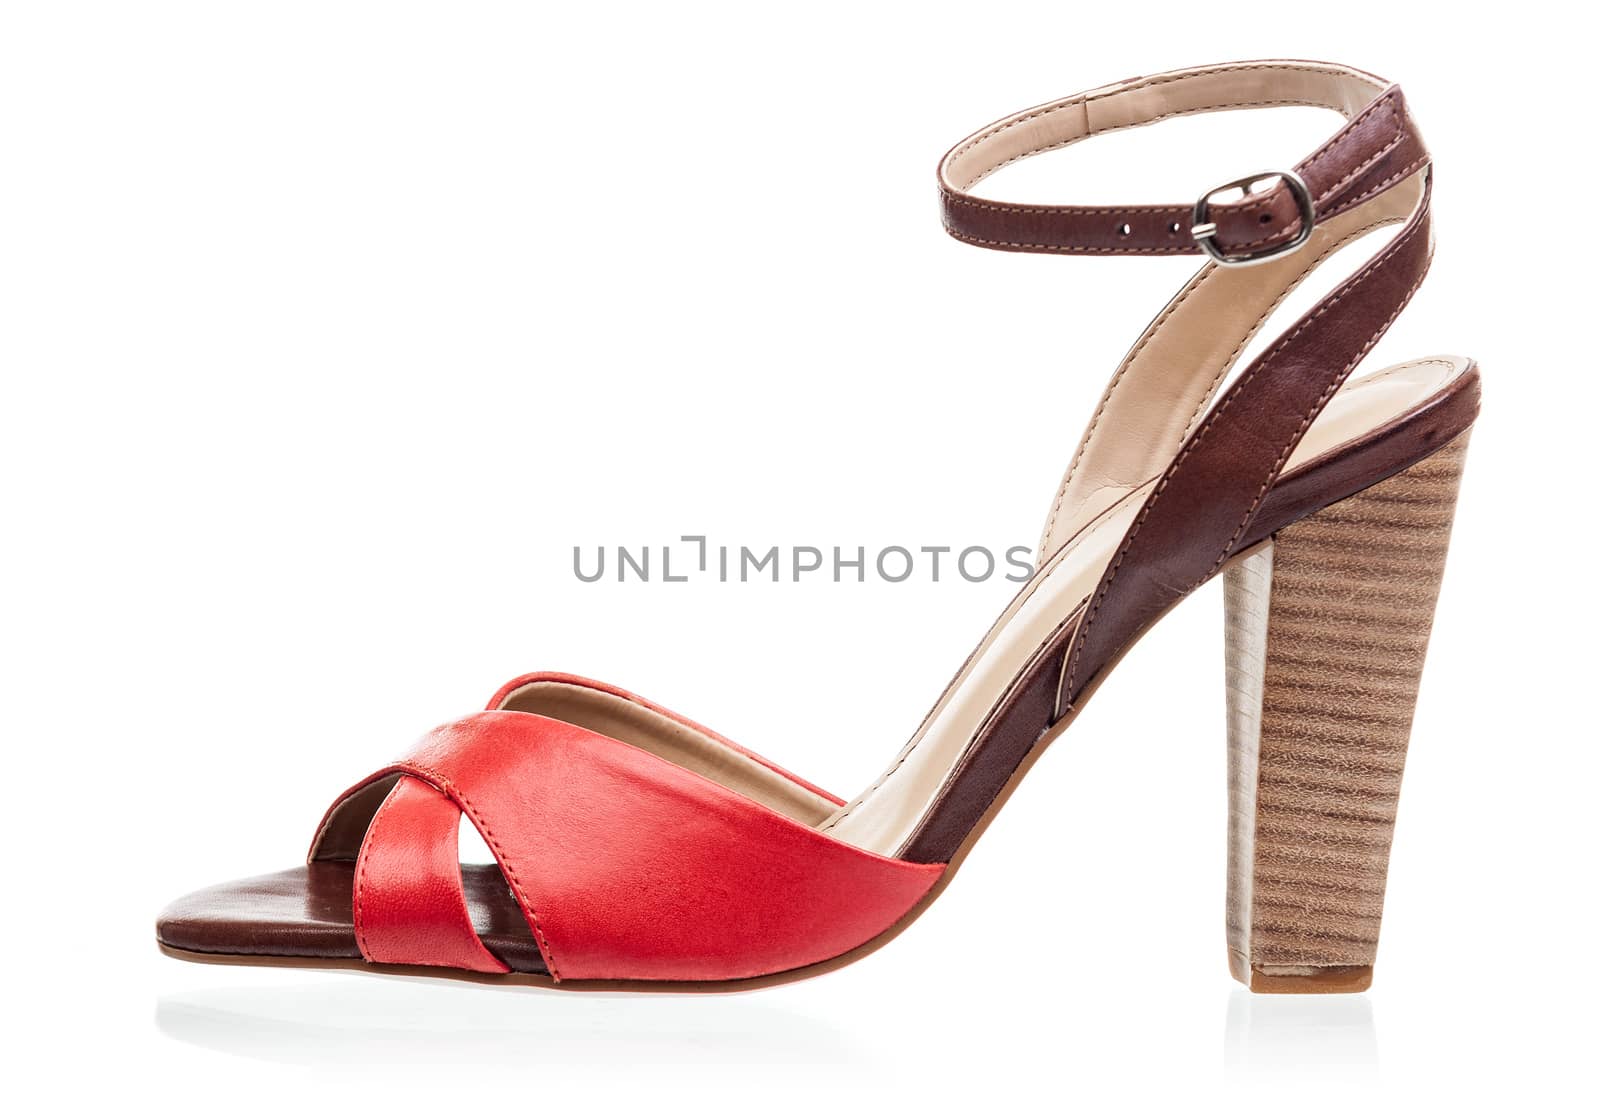 High heel sandal isolated over white background